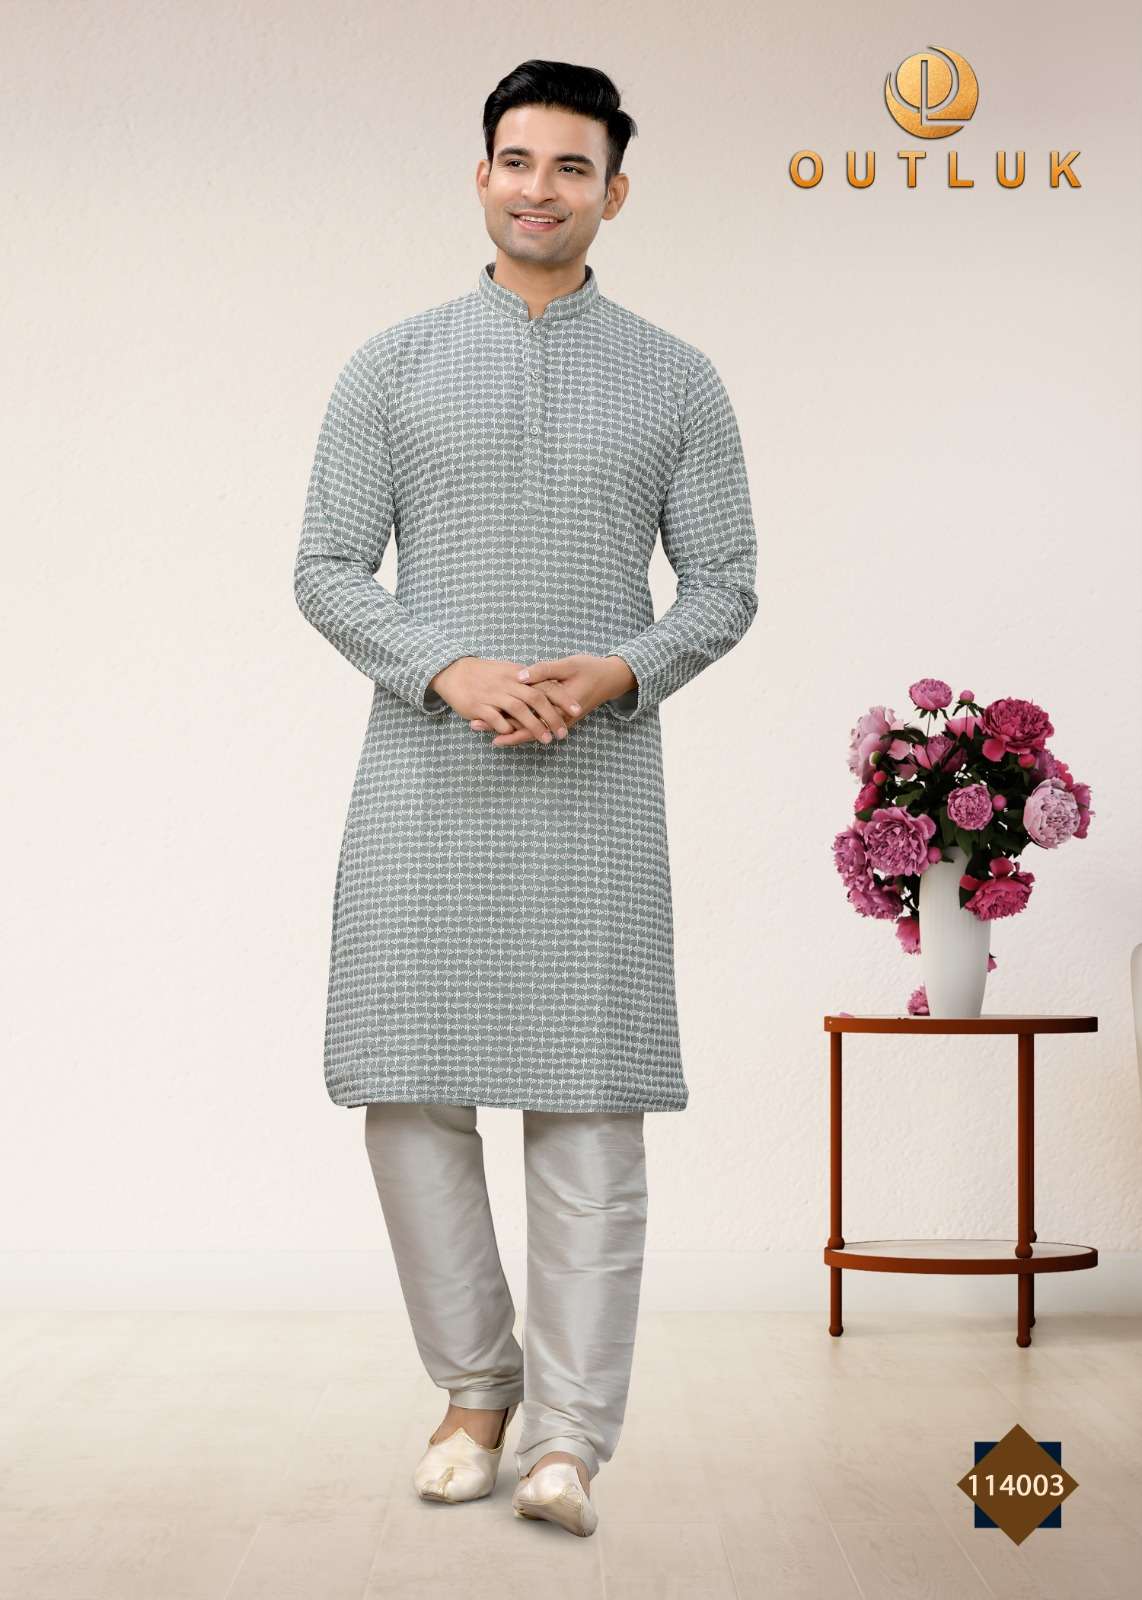 20 Ethnic Wear Captions And Quotes For Men – House of Chikankari